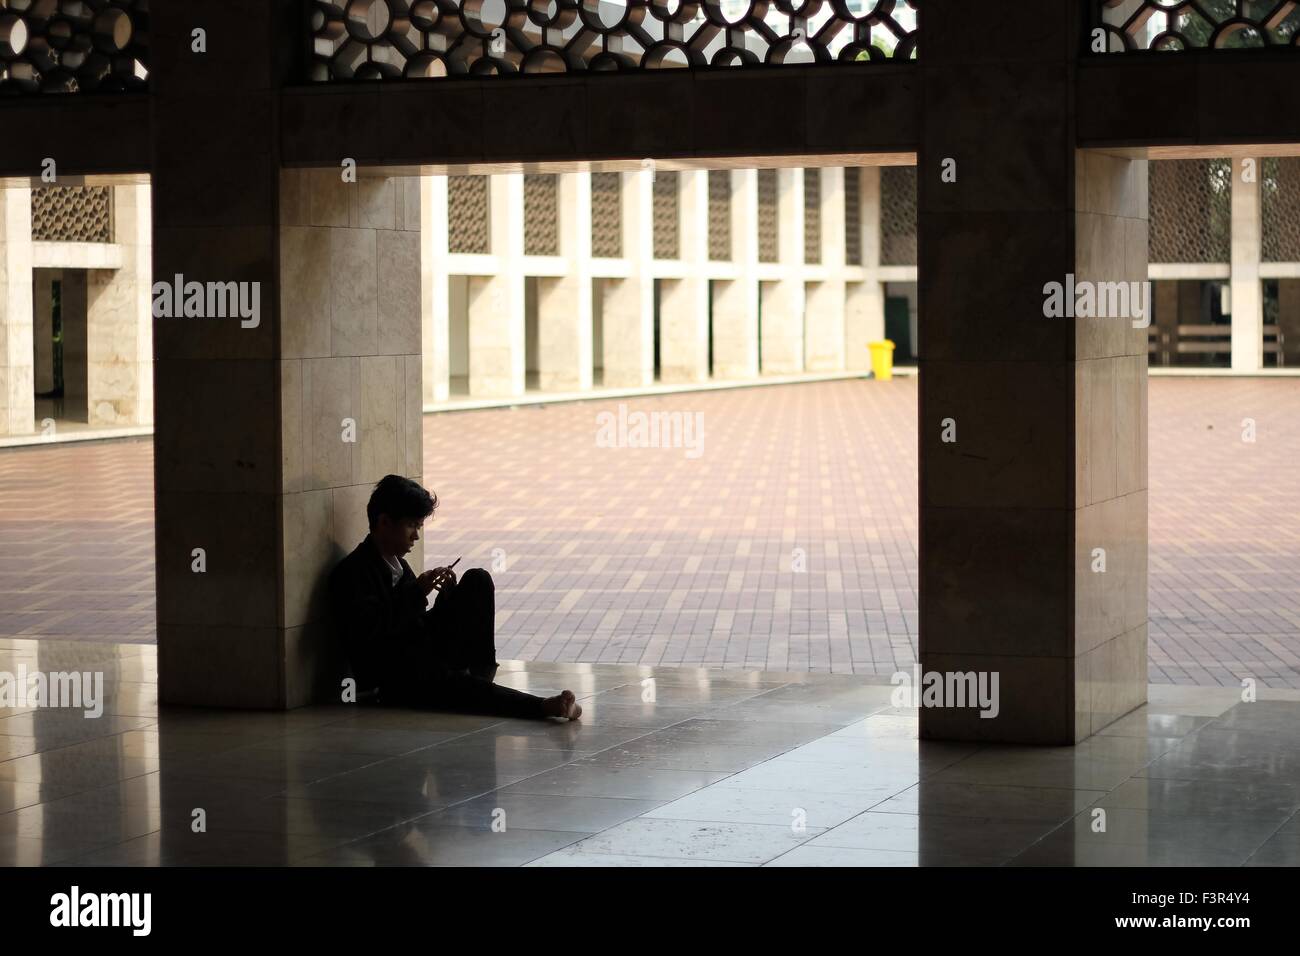 Jakarta, Indonesia. 09th Oct, 2015. Muslim rests at the Istiqlal Mosque. Istiqlal Mosque in Jakarta is the biggest mosque in Southeast Asia, befitting its location in the largest Muslim country in the world in terms of population. © Garry Andrew Lotulung/Pacific Press/Alamy Live News Stock Photo